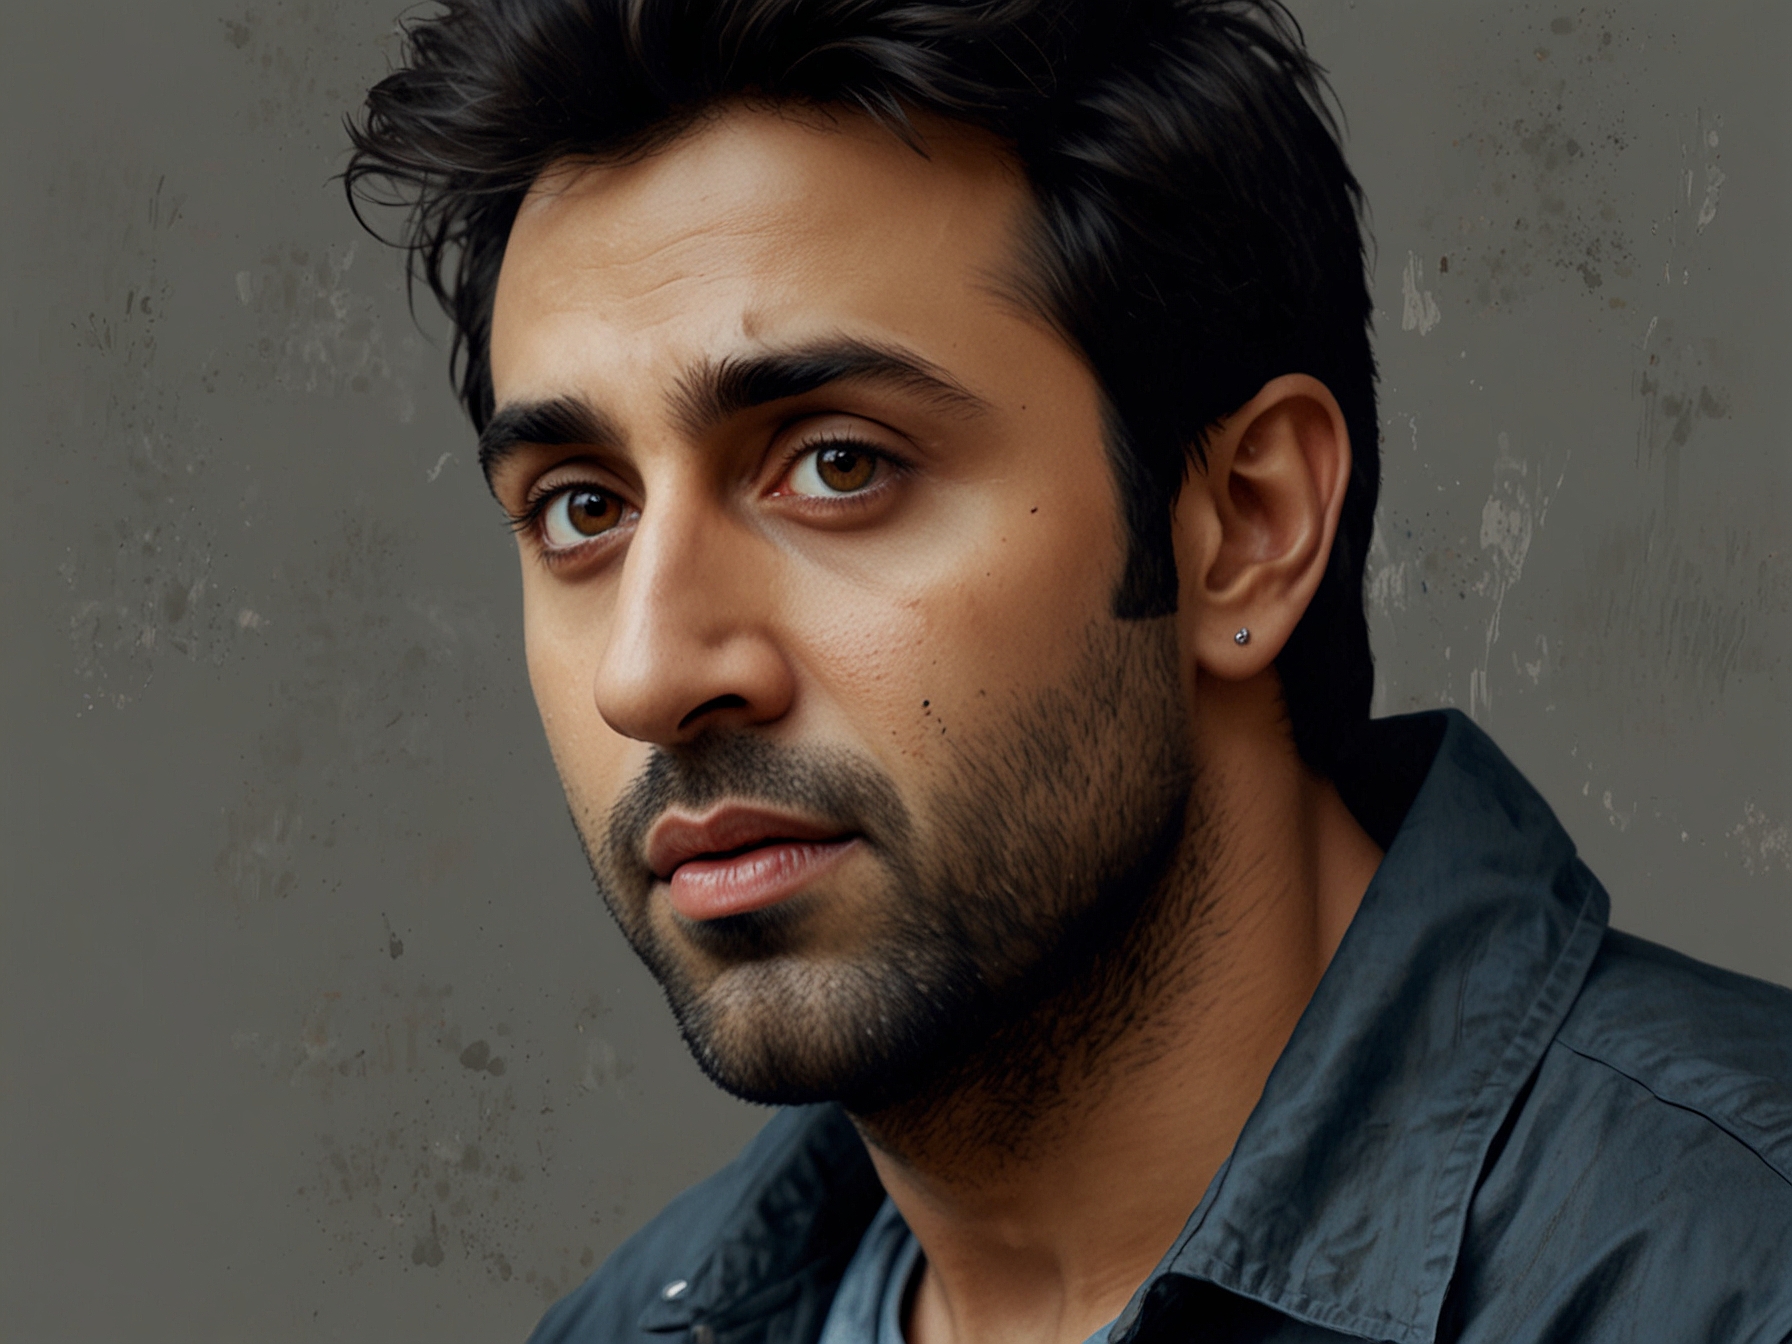 Ranbir Kapoor as a morally ambiguous character in 'Animal', showcasing a complex portrayal that defies typical hero conventions, emphasizing the film's bold narrative approach.